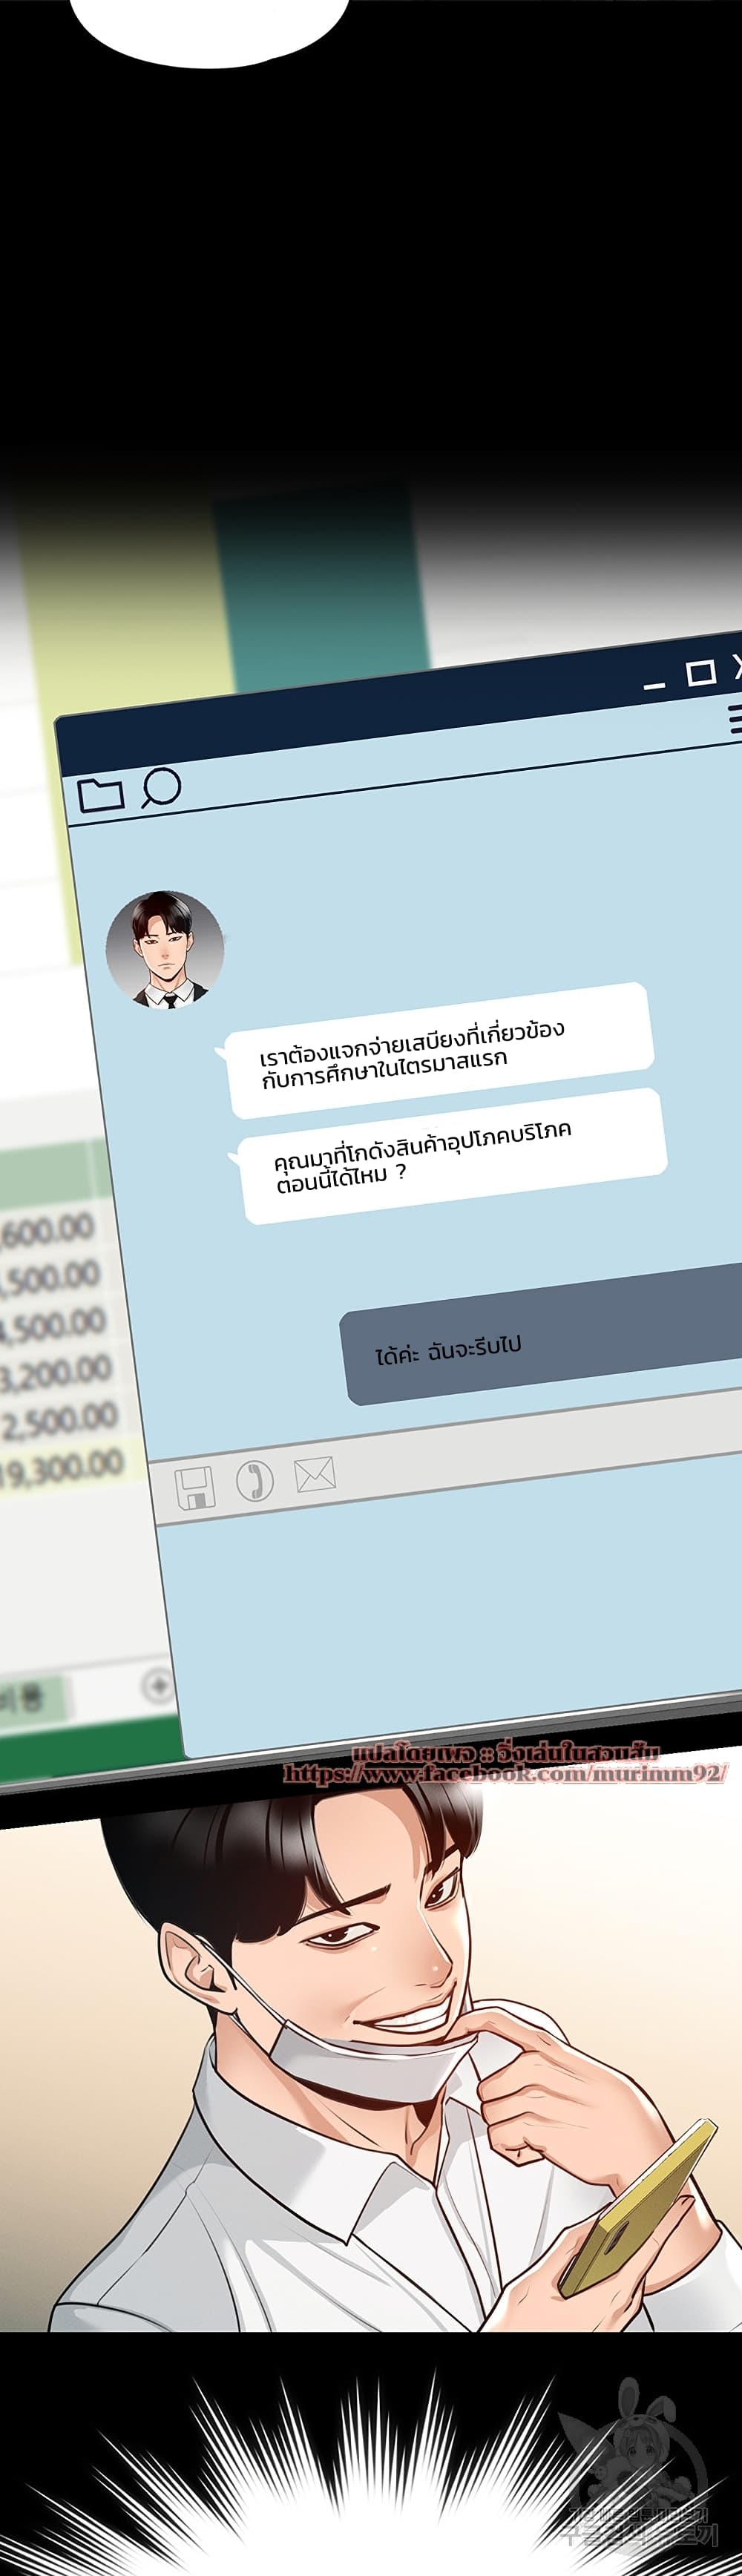 Workplace Manager Privileges ตอนที่ 3 ภาพ 1